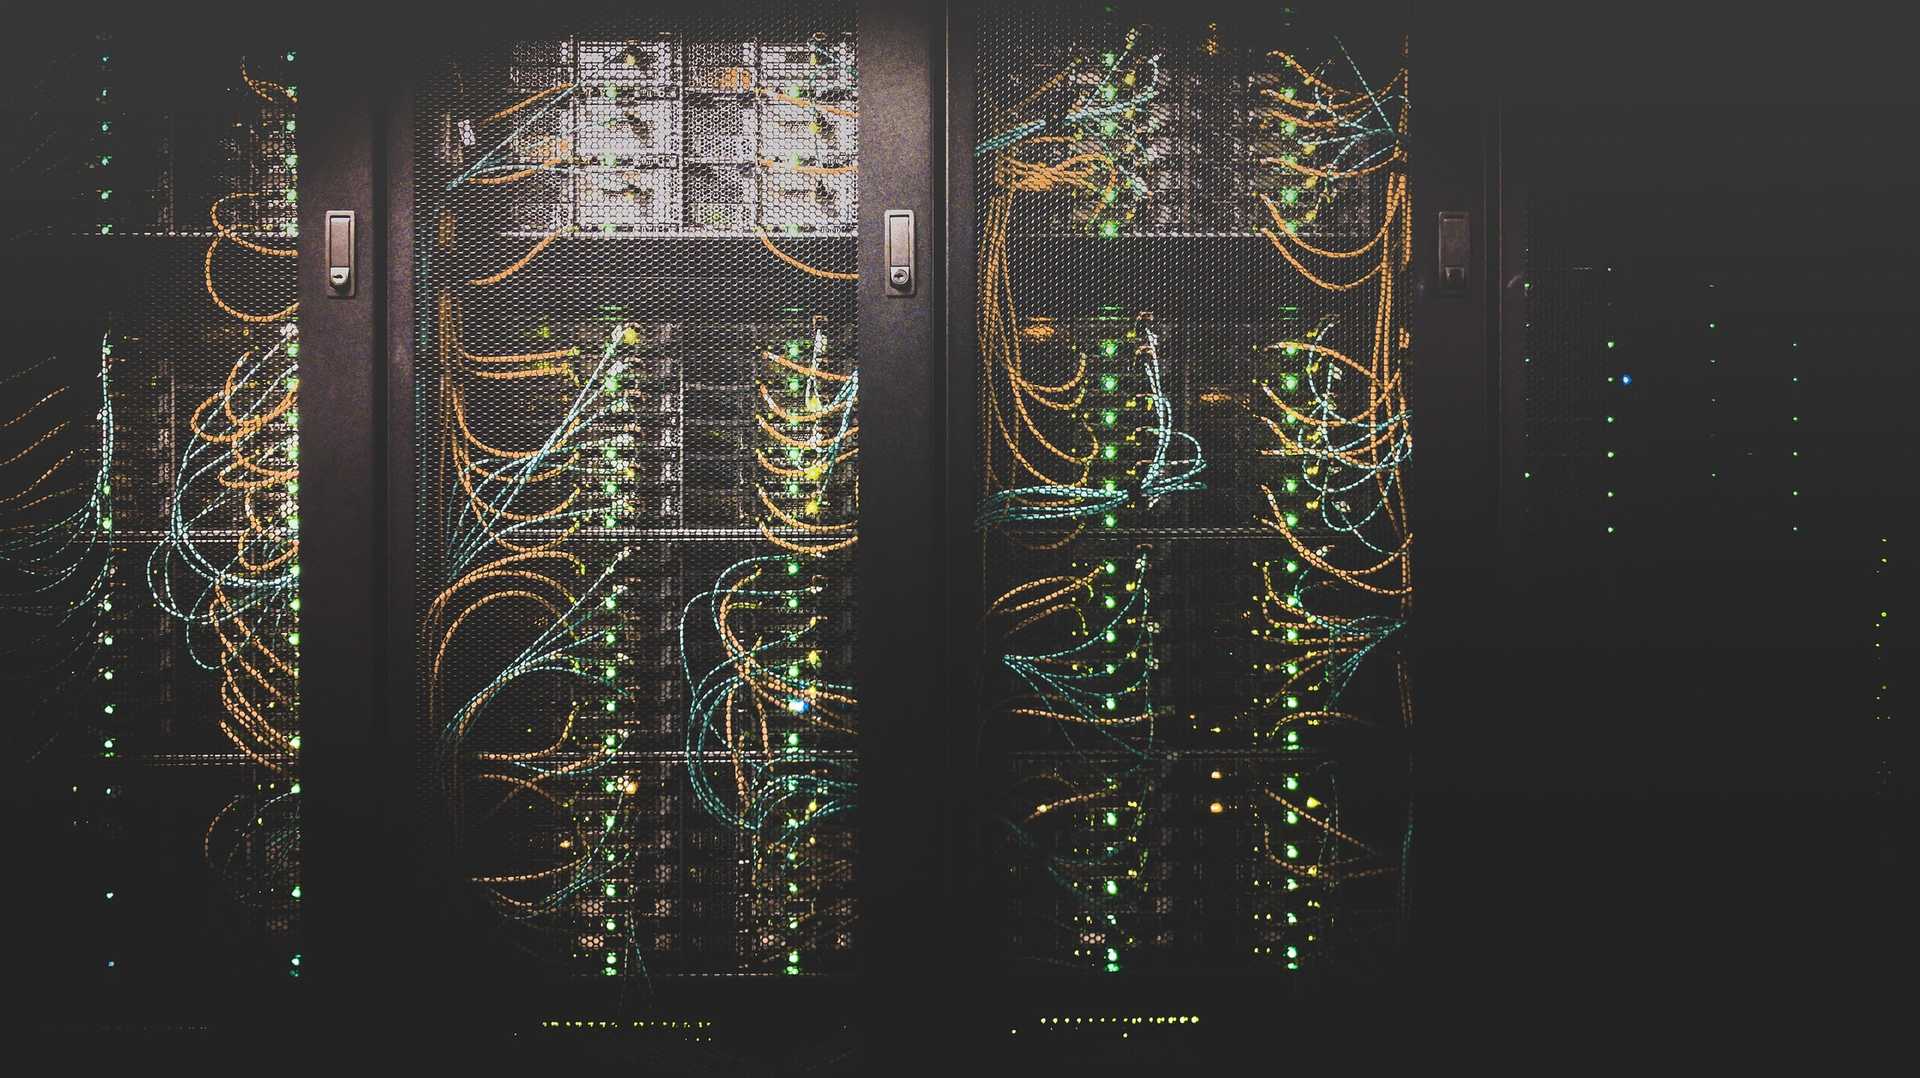 Wires connect server racks in a data center.